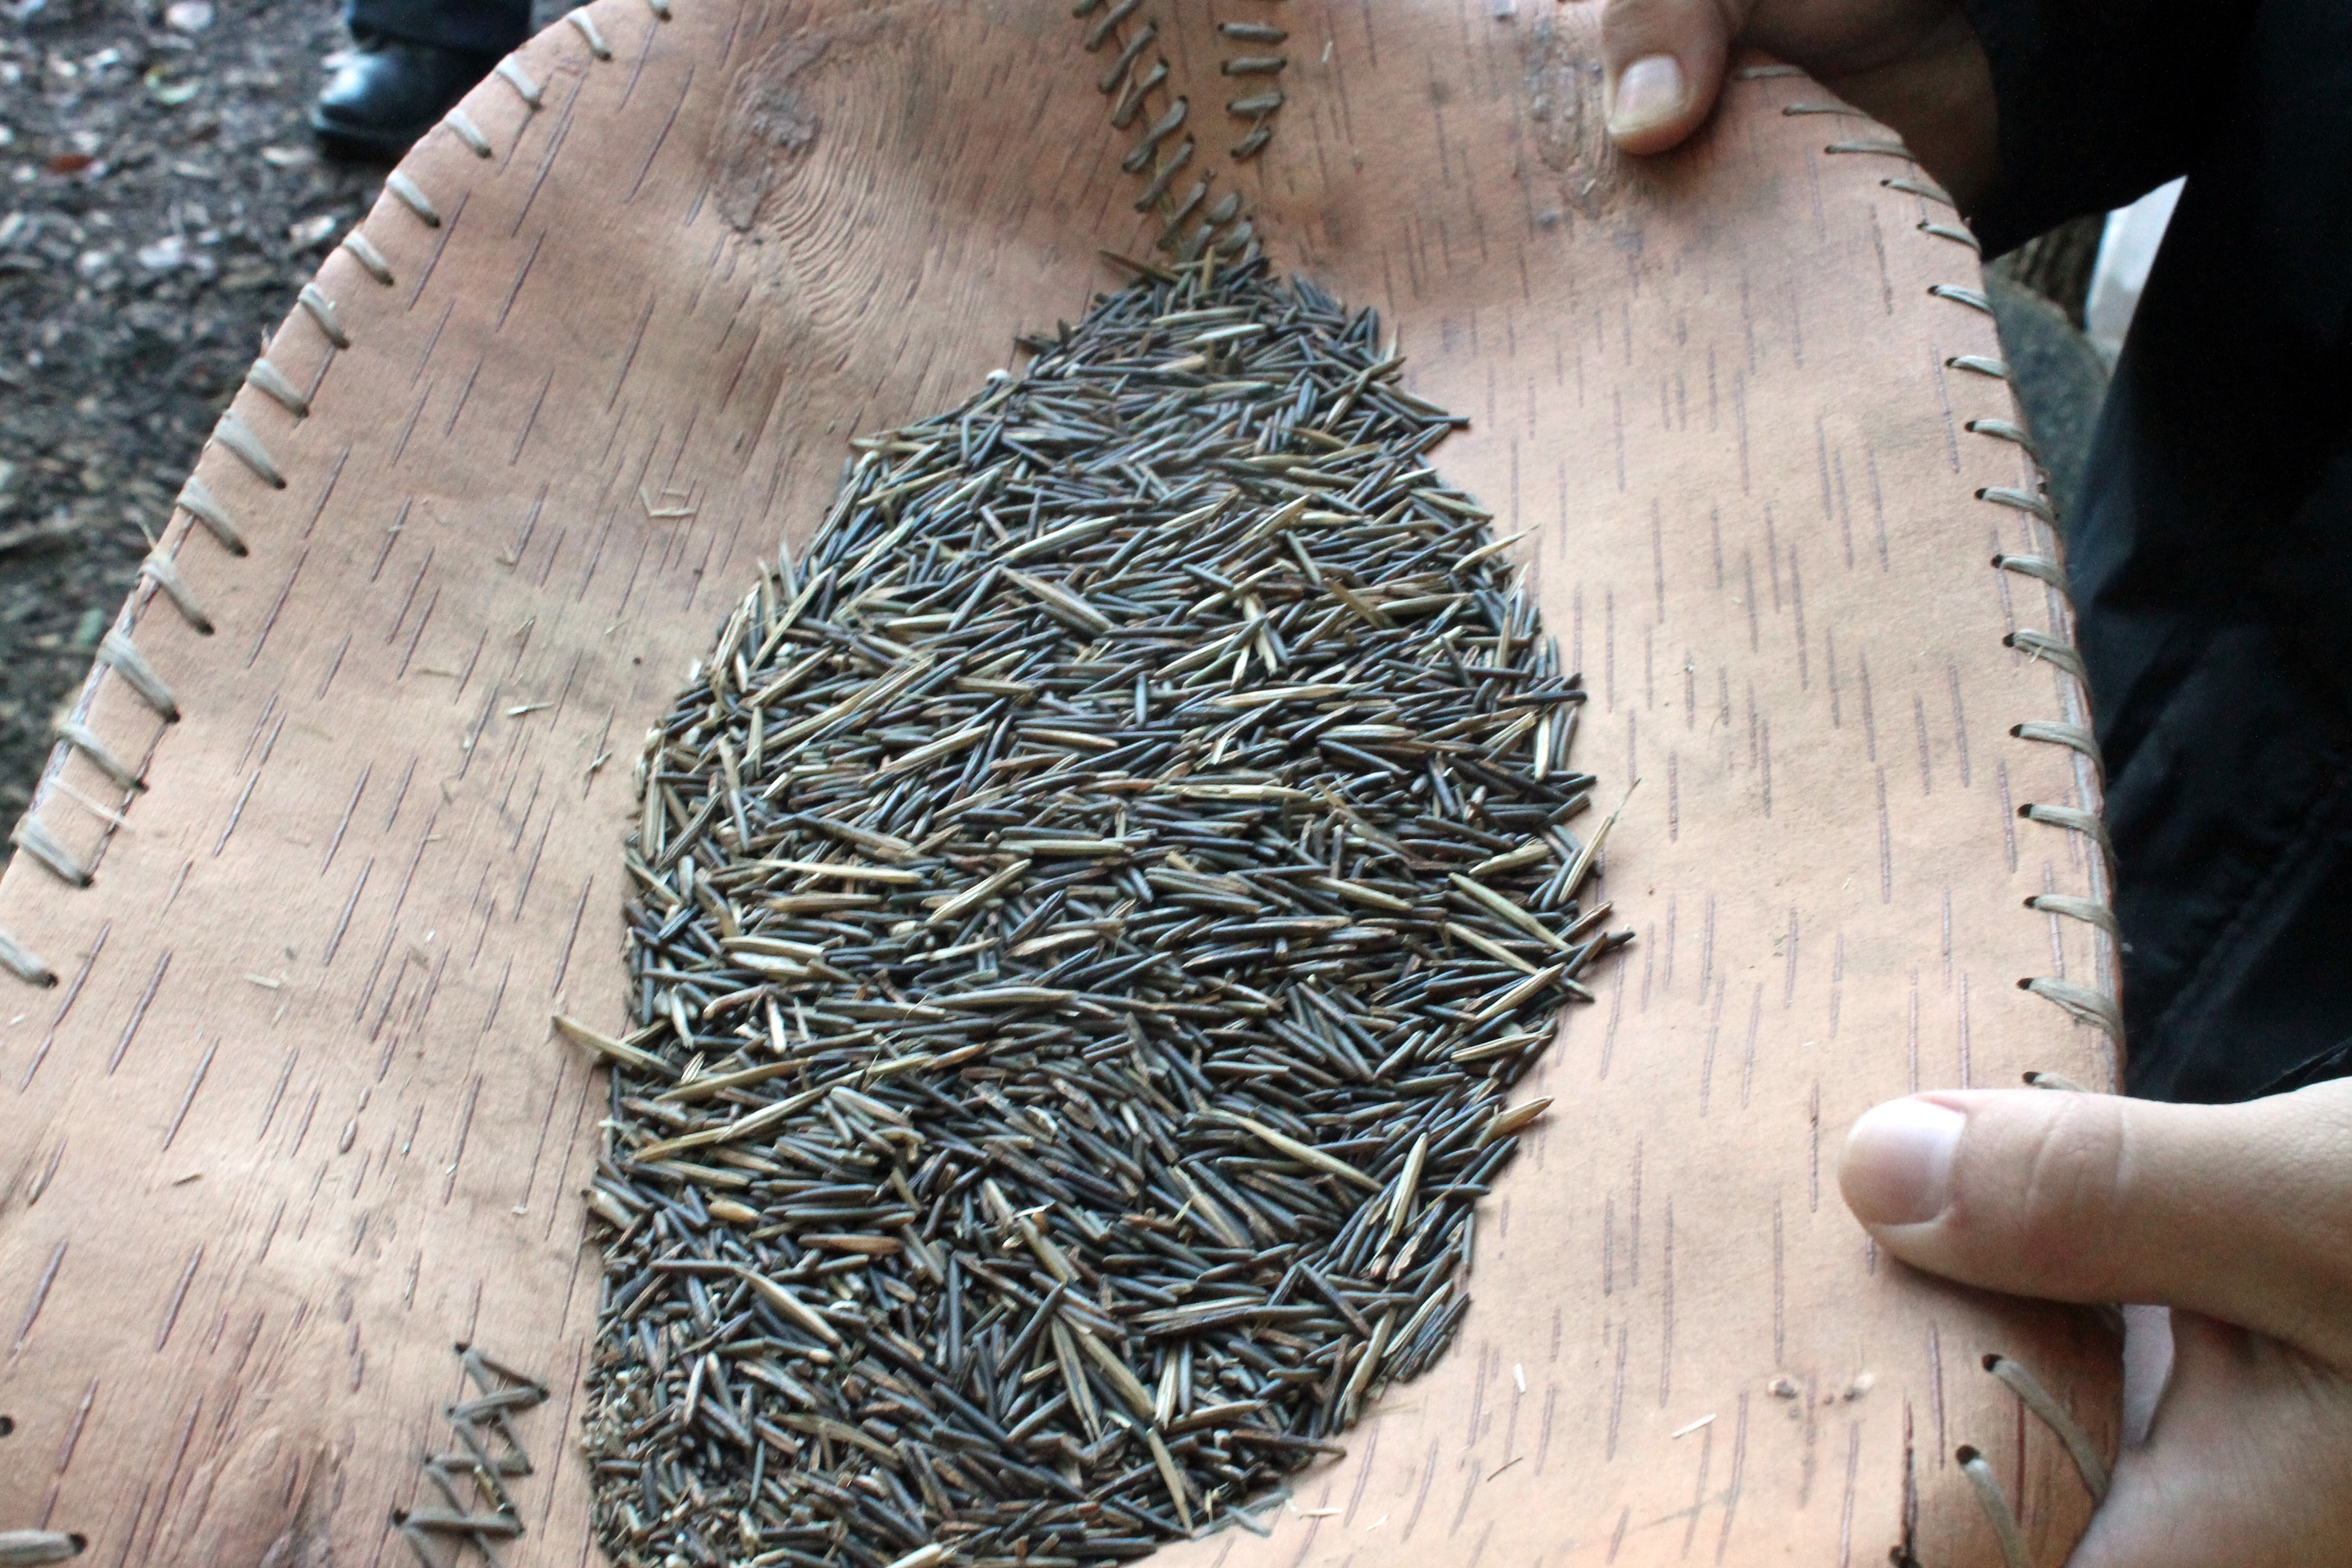 Grains of wild rice are processed in a light brown vessel